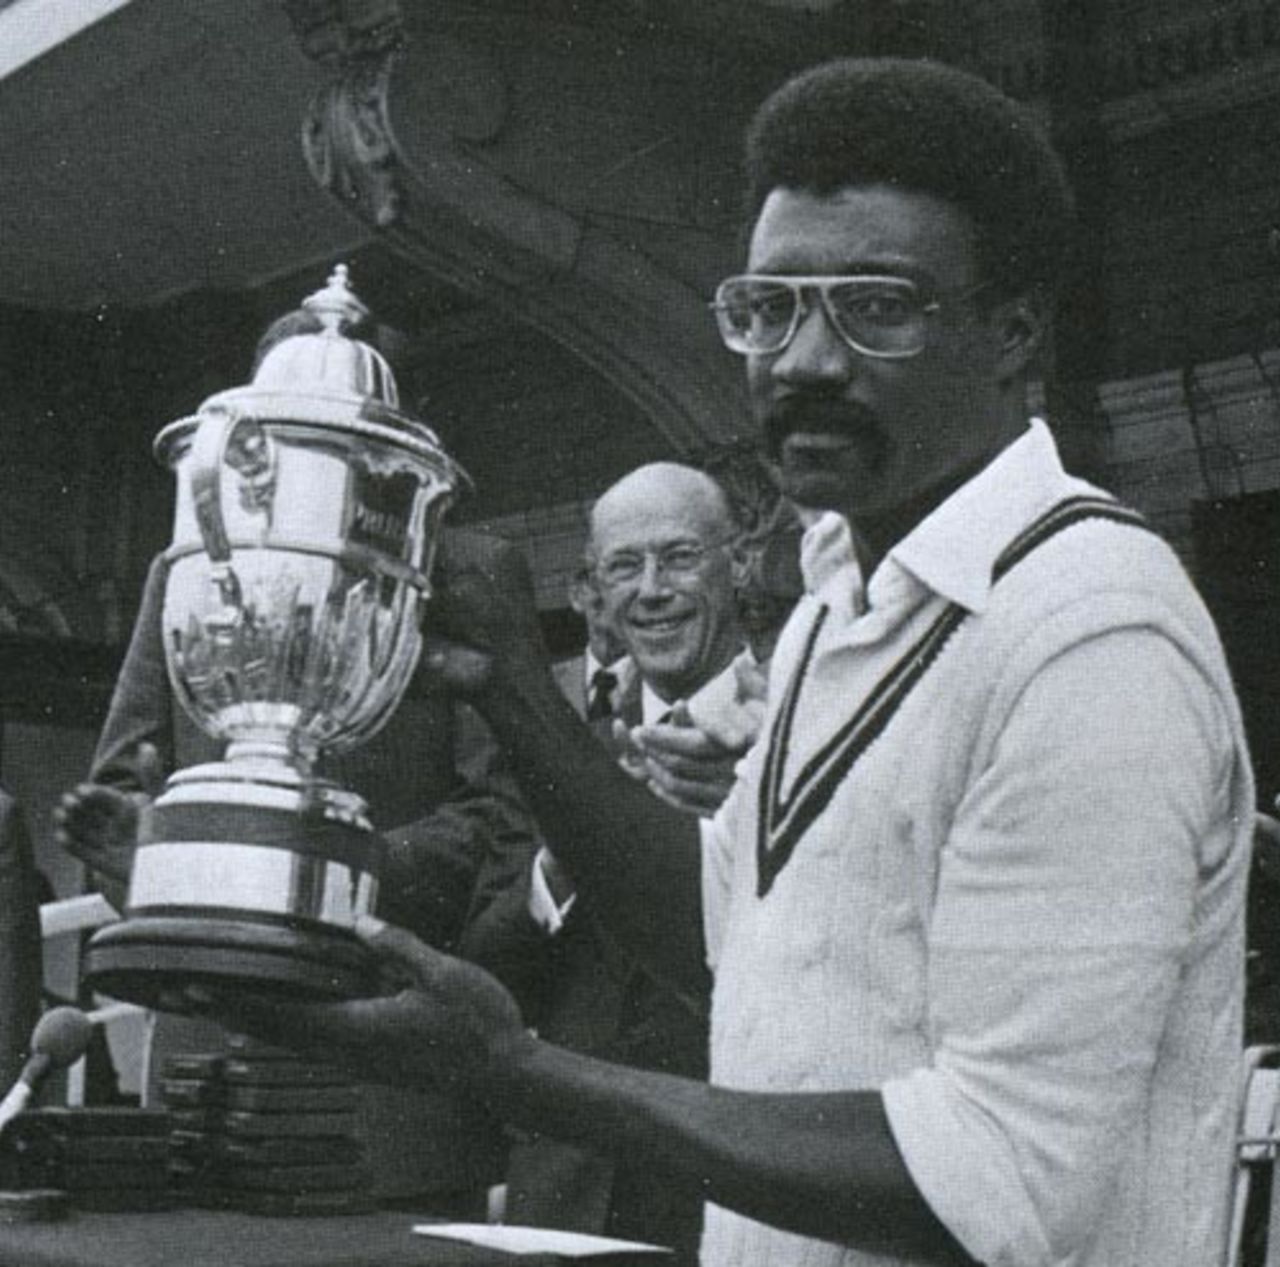 Clive Lloyd holds the World Cup after West Indies win in 1979, West Indies v England, Lord's, June 23, 1979